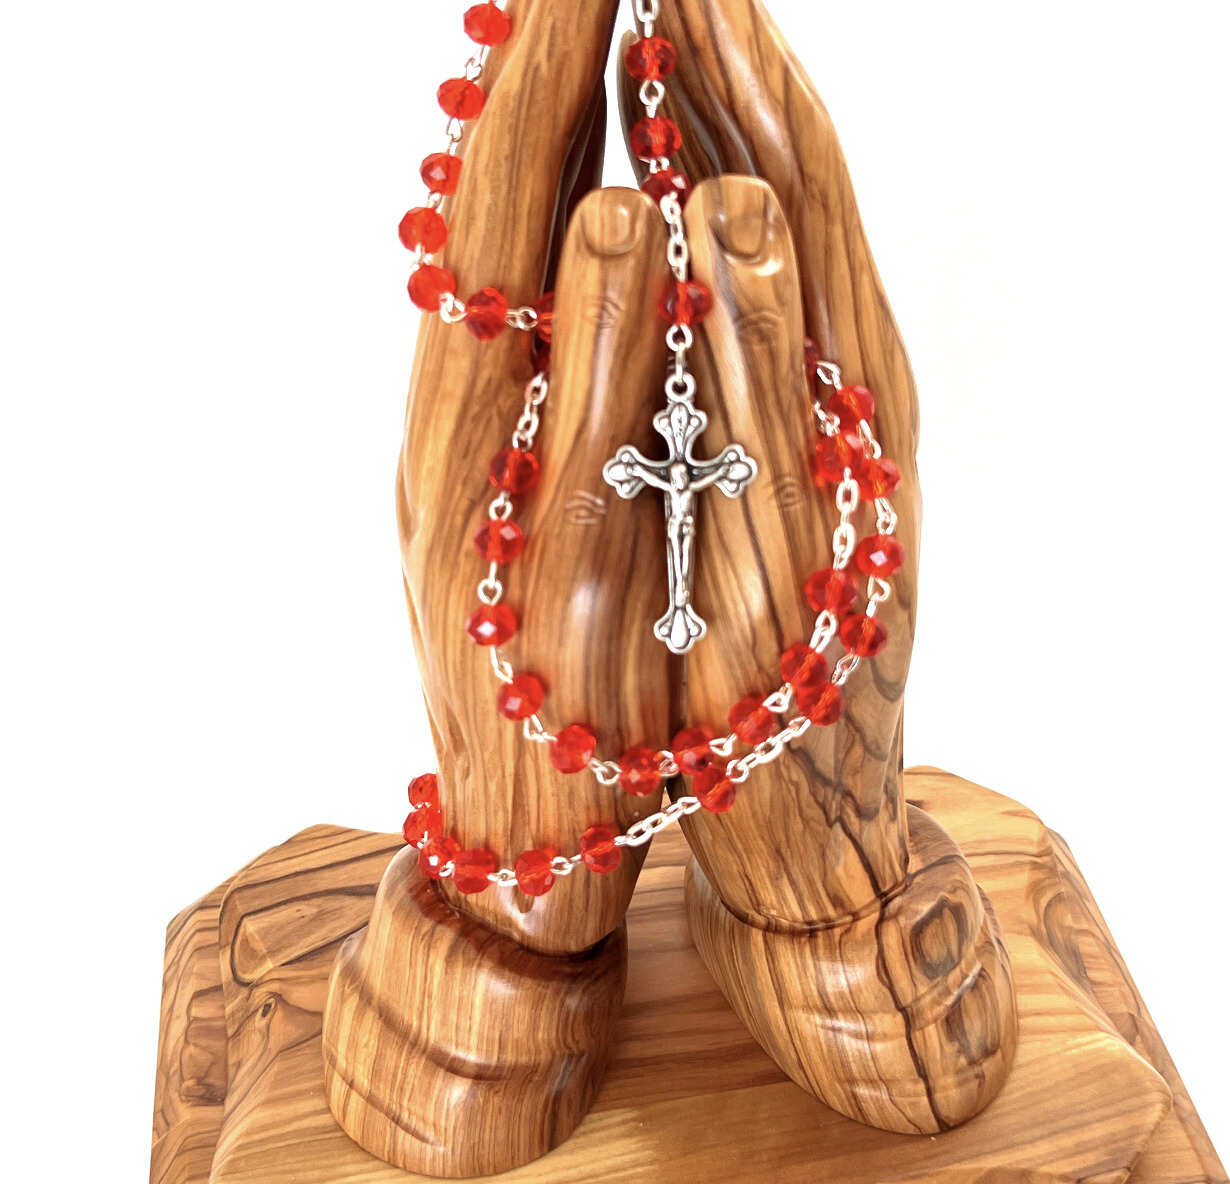 Rosary with Red Crystal Beads - 55cm